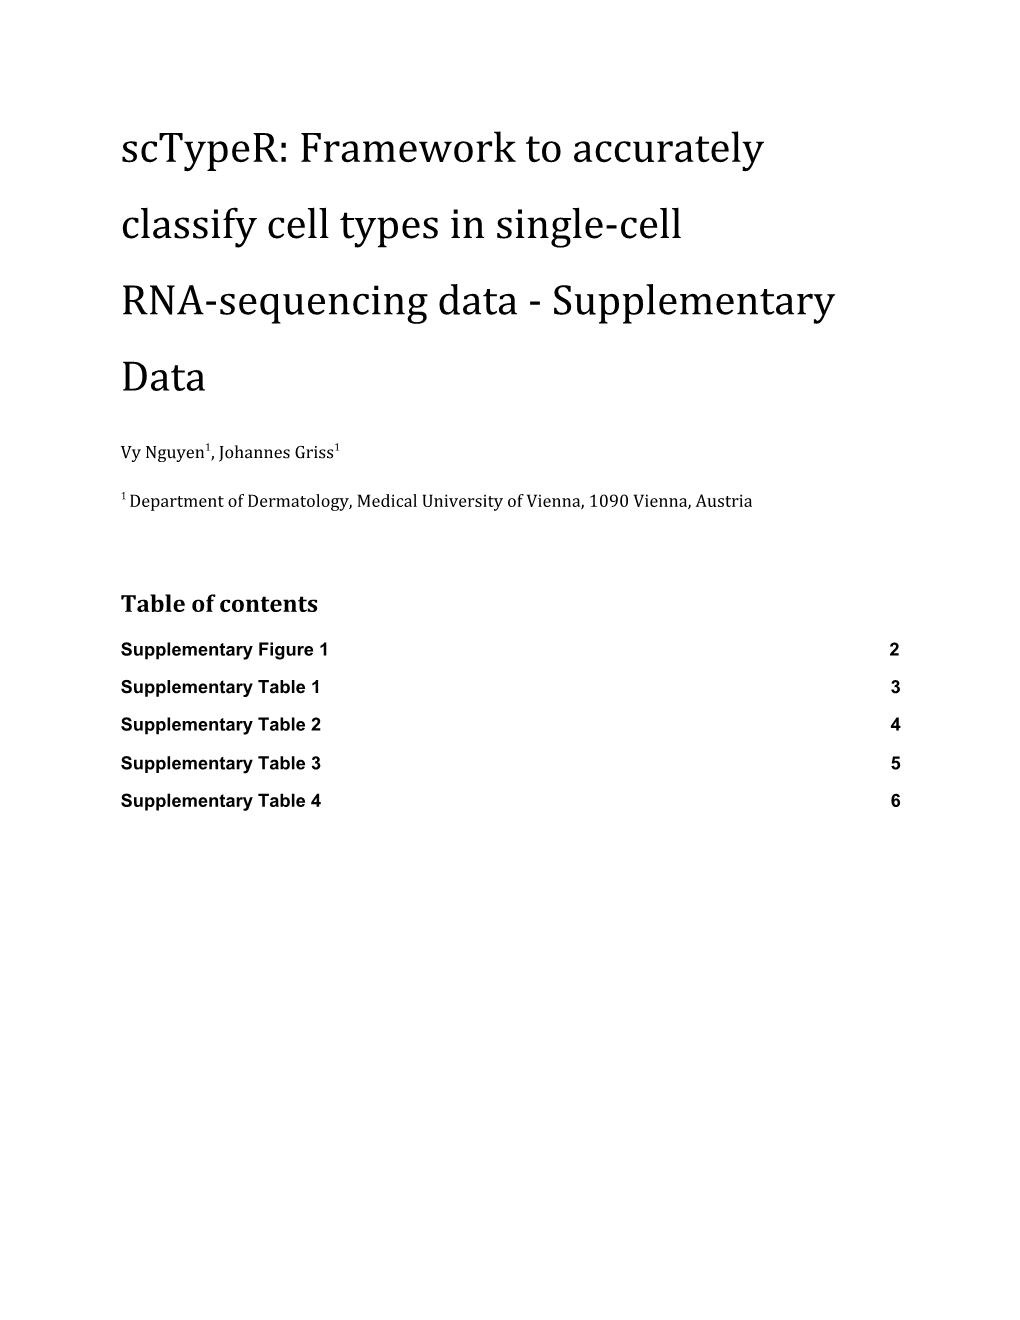 Sctyper: Framework to Accurately Classify Cell Types in Single-Cell RNA-Sequencing Data - Supplementary Data